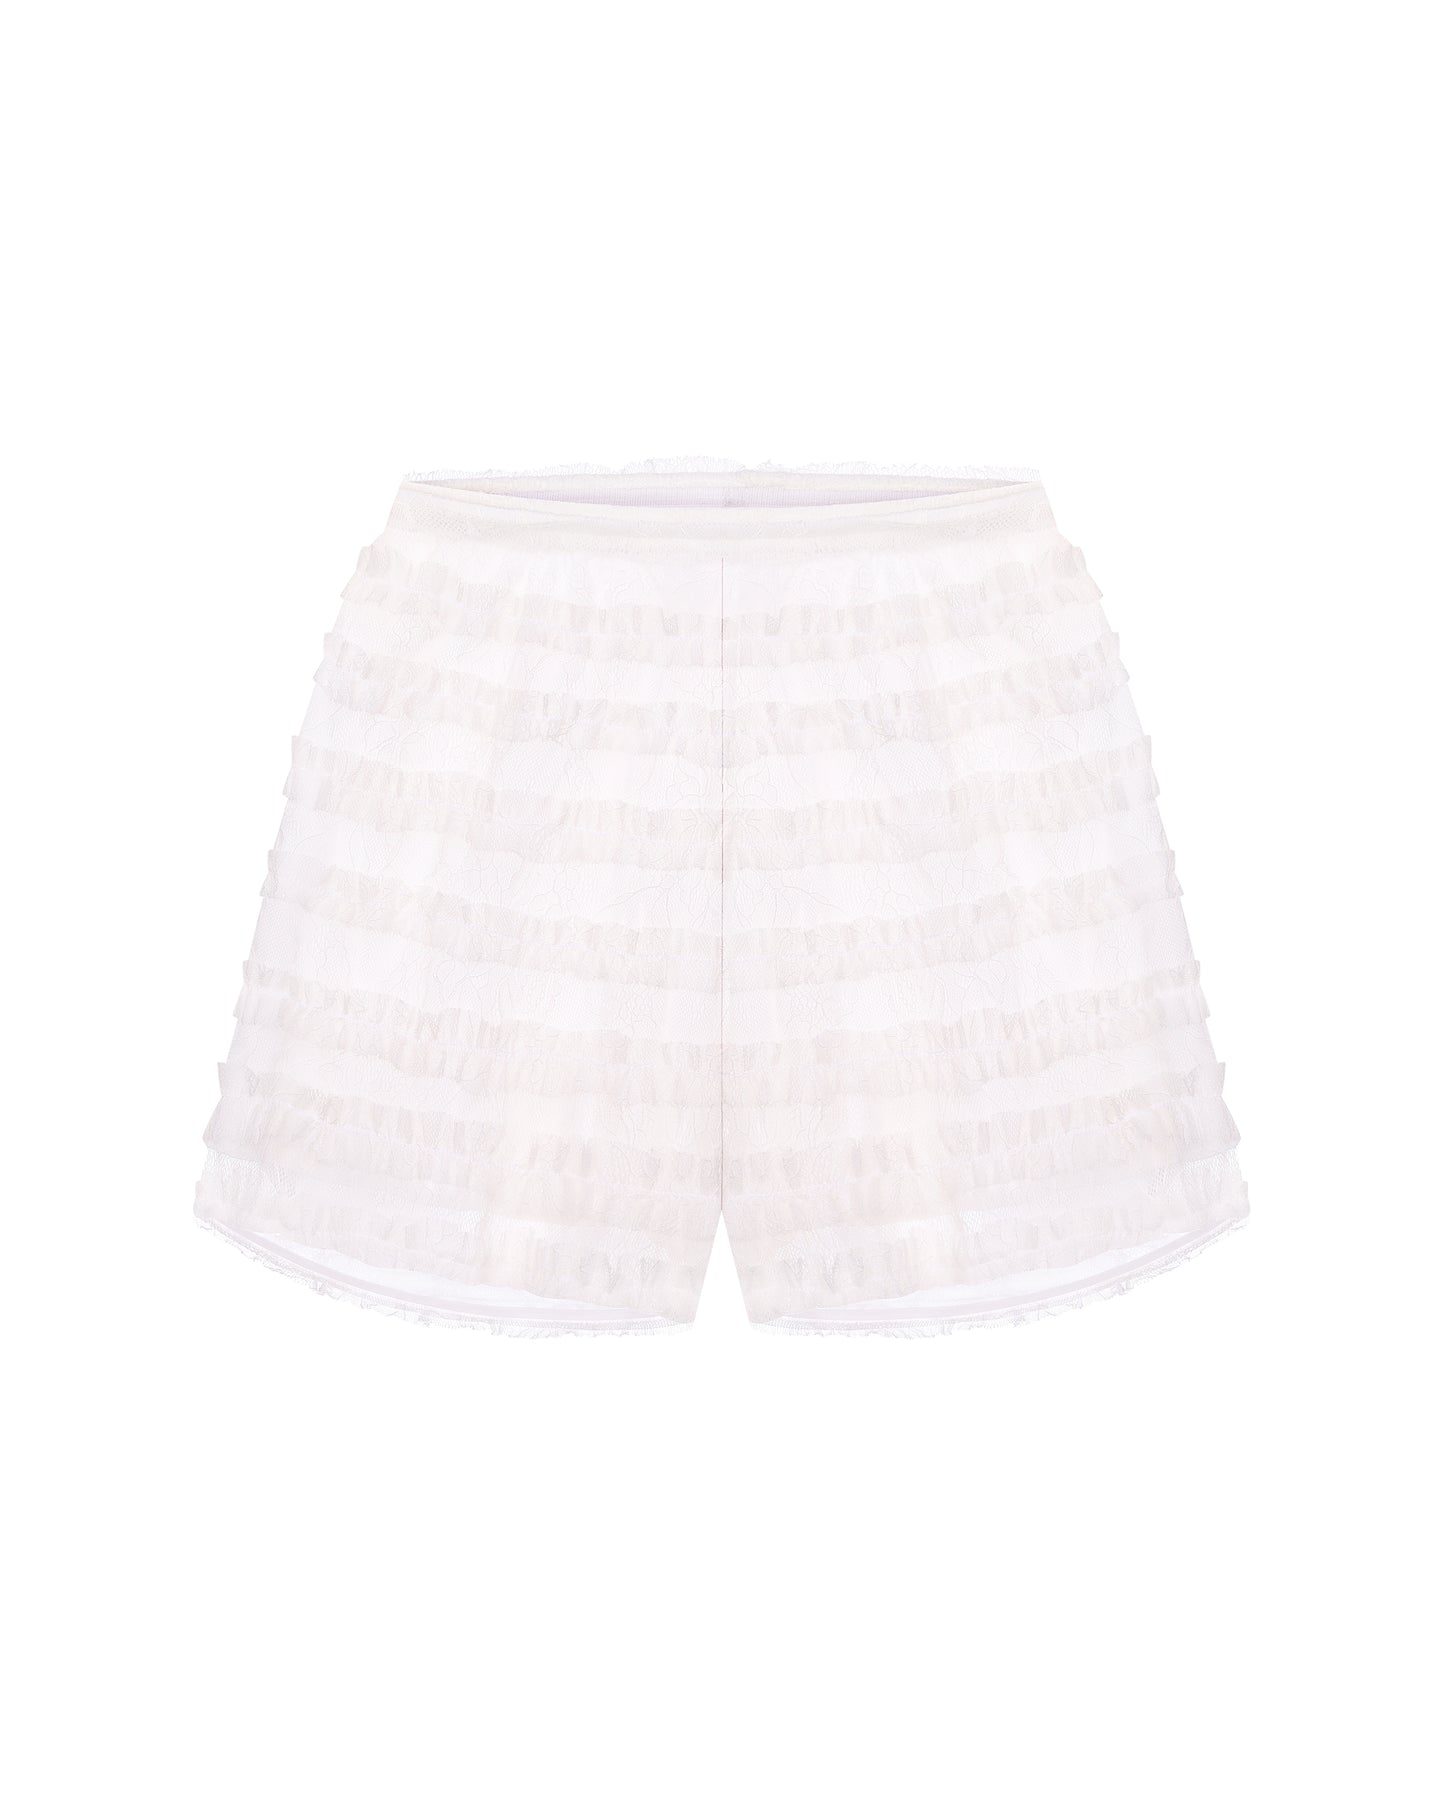 Lace shorts in milk